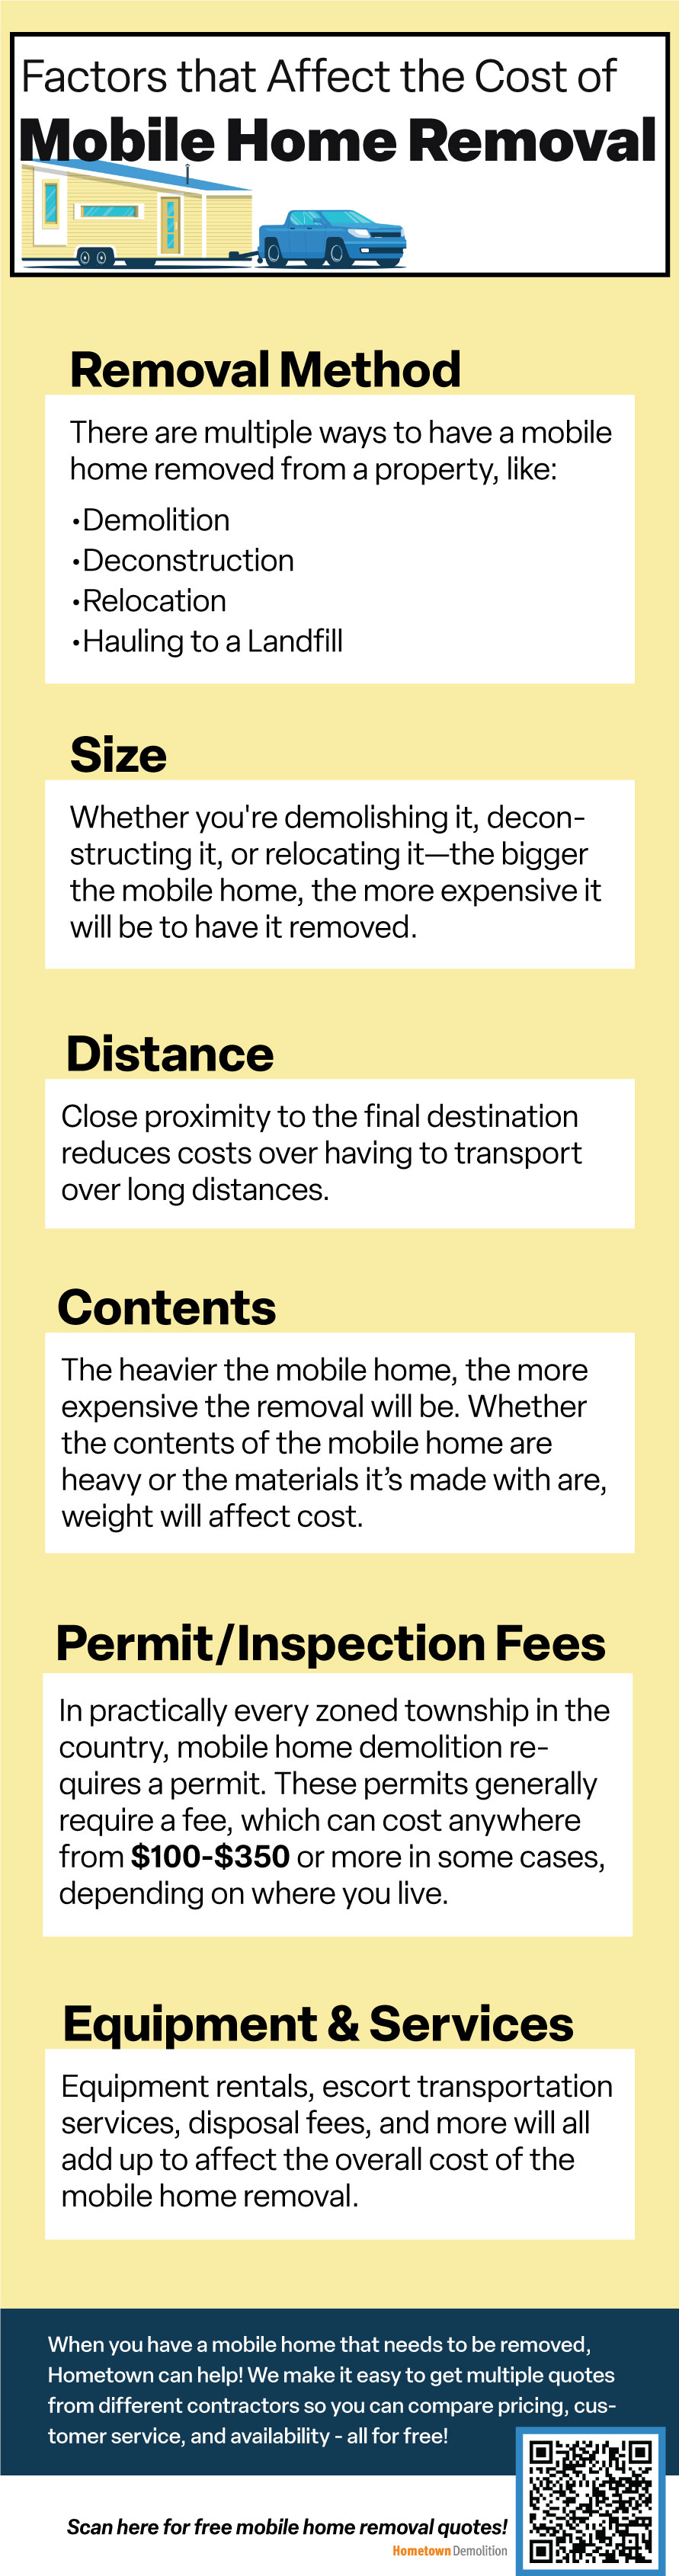 factors that affect the cost of mobile home removal infographic